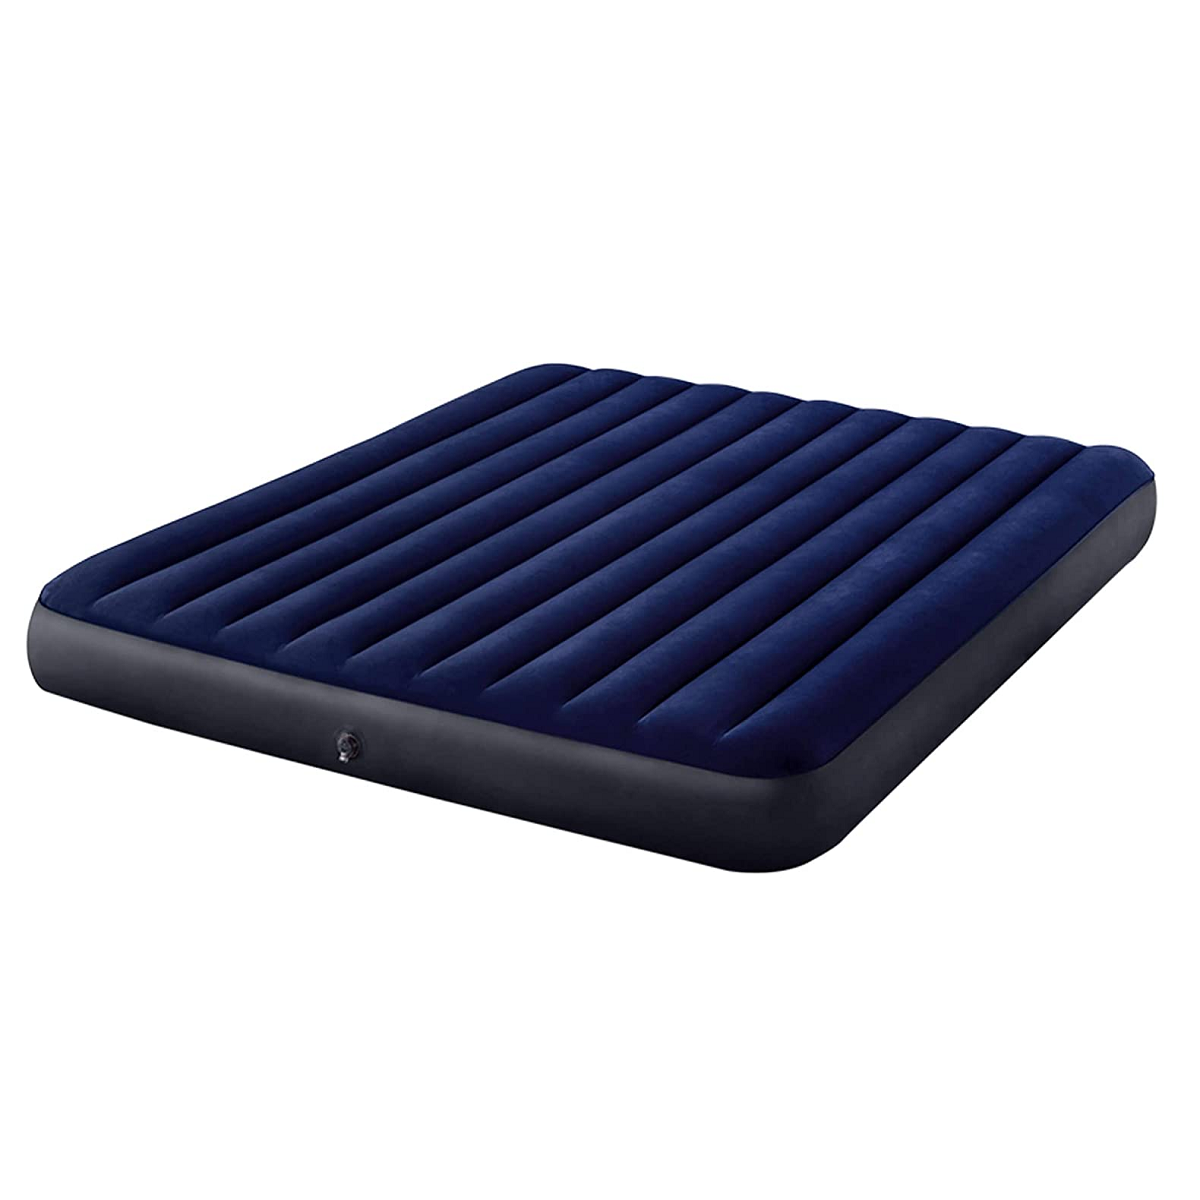 INTEX Airbed 39"x75"x10" Twin Size Classic Downy Dura-Beam With Fiber-Tech Technology Standard Series